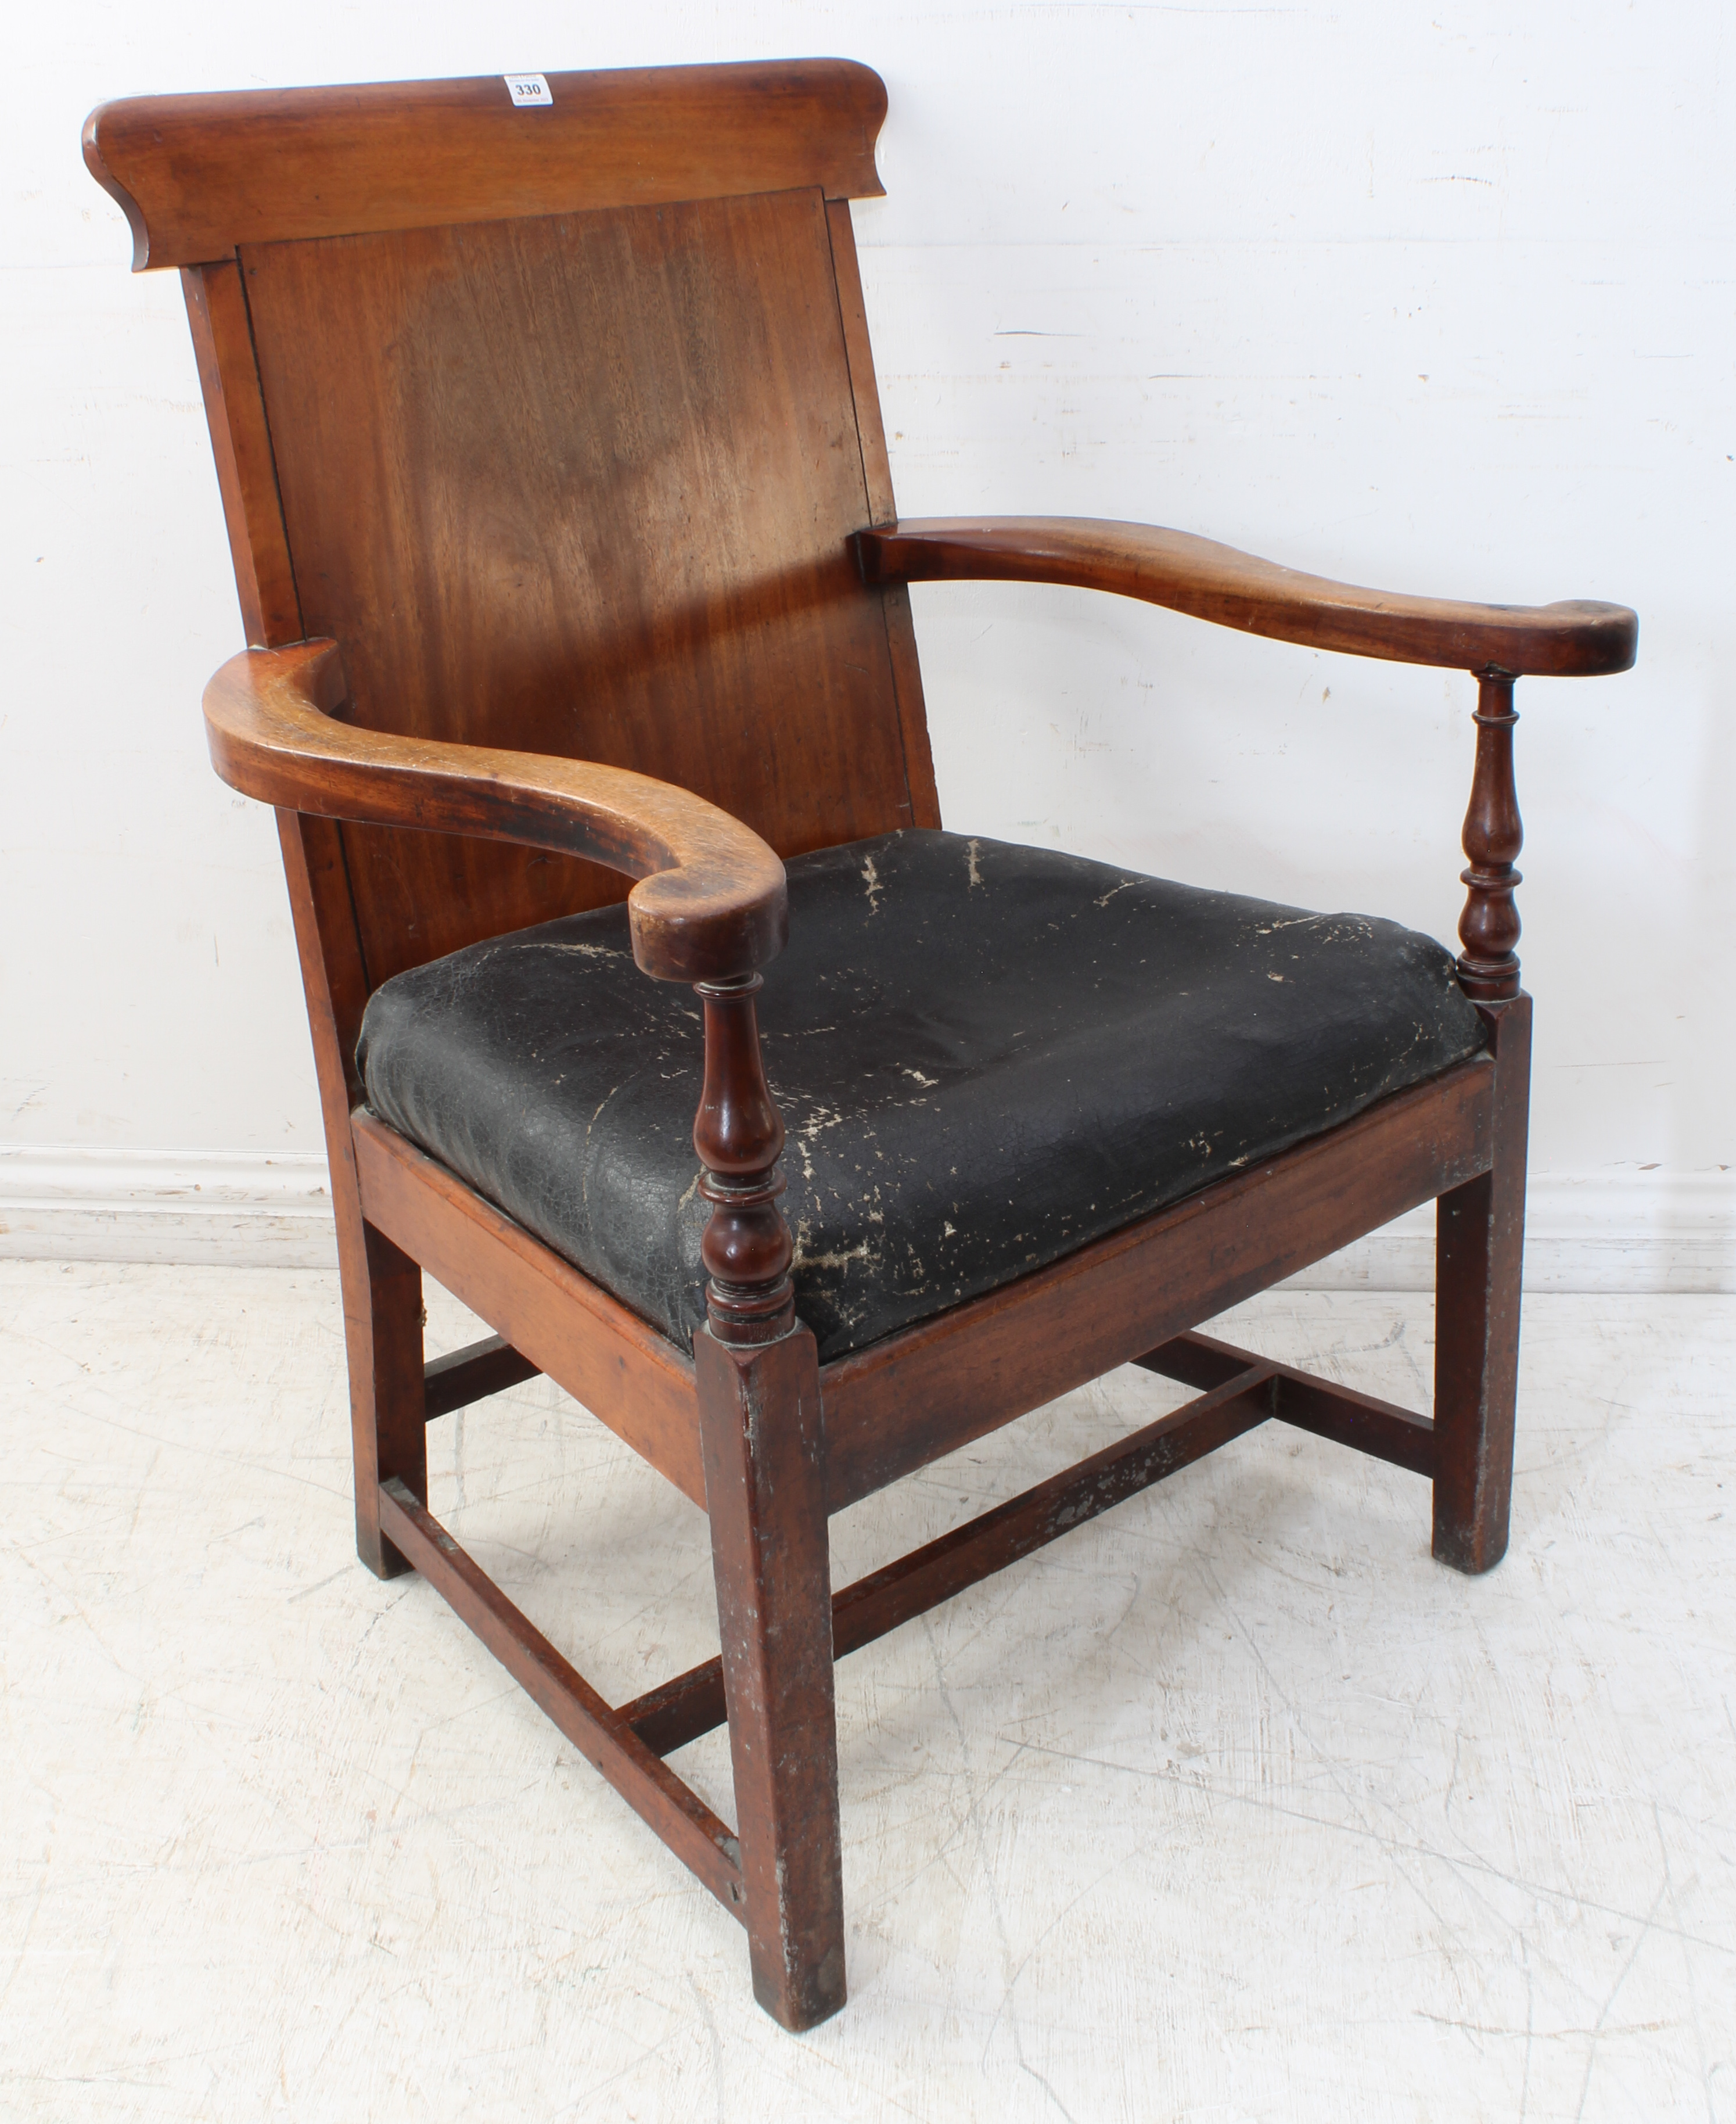 An oversized late Georgian or early Victorian mahogany open armchair: shaped top rail, outset